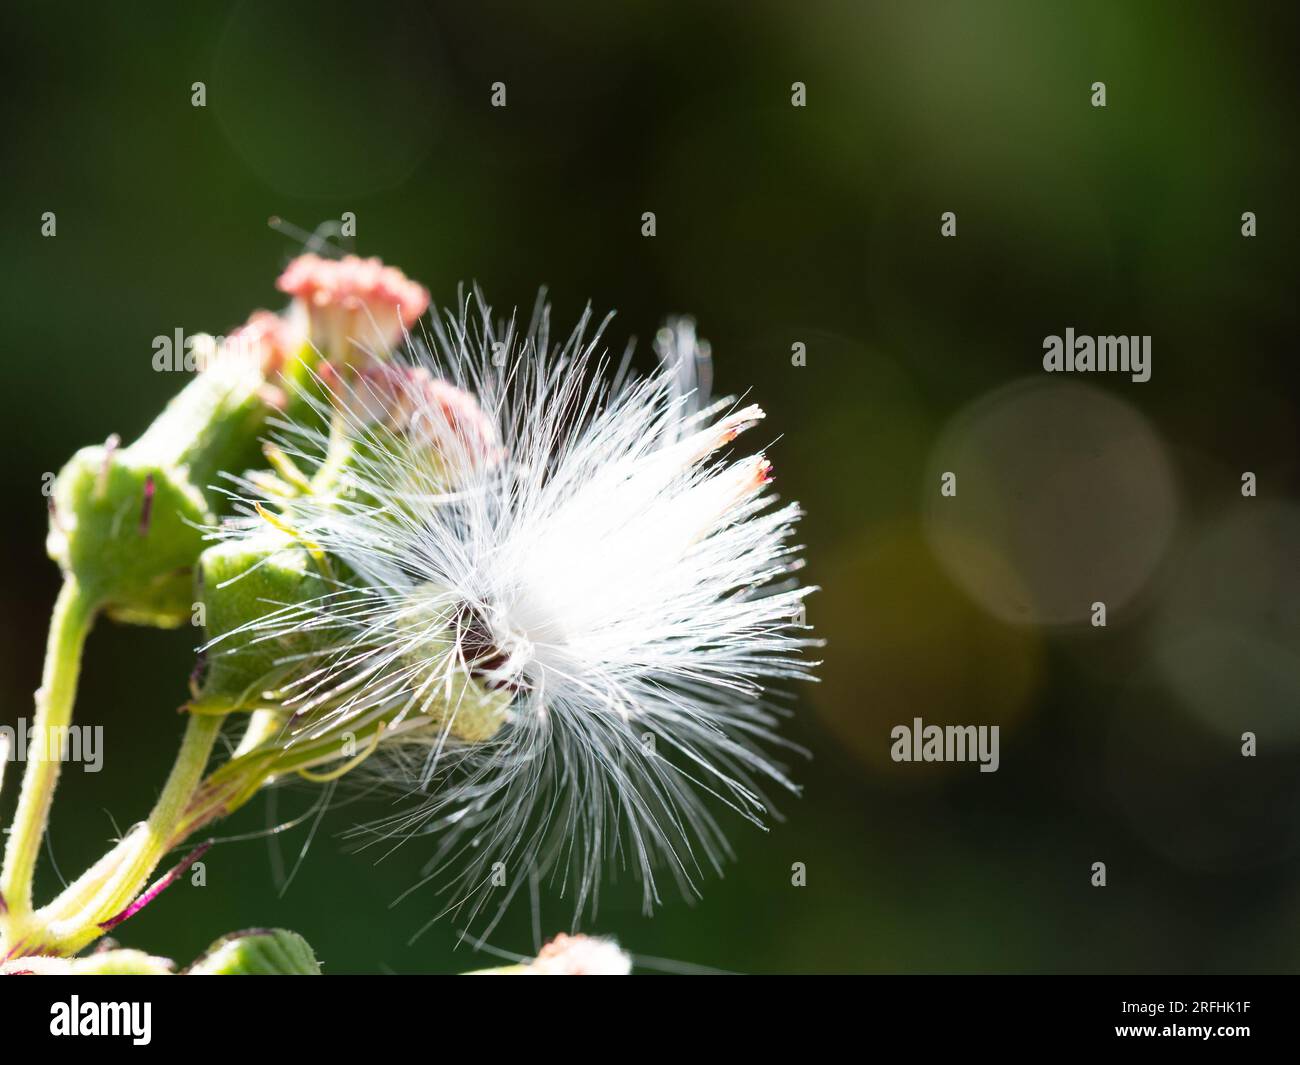 A tuffty white seed head of the Thickhead Flower , bright in the sunlight on a dark Bokeh background Stock Photo